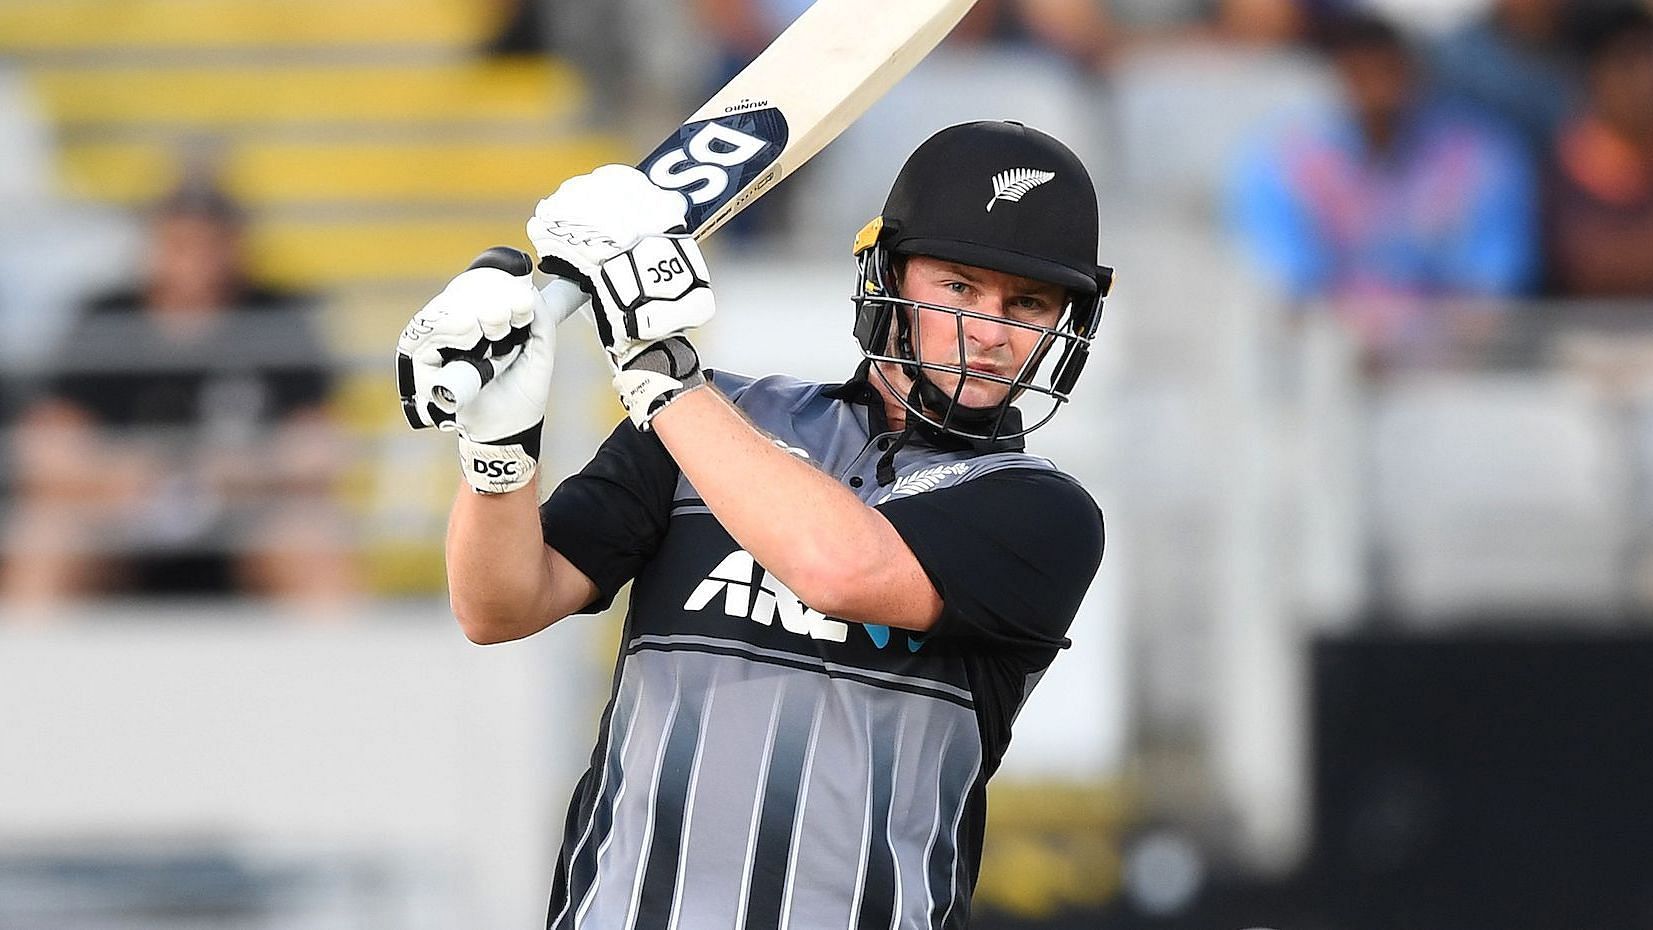 Colin Munro scored 64 off 47 deliveries in the 4th T20 against India in Wellington on Friday.